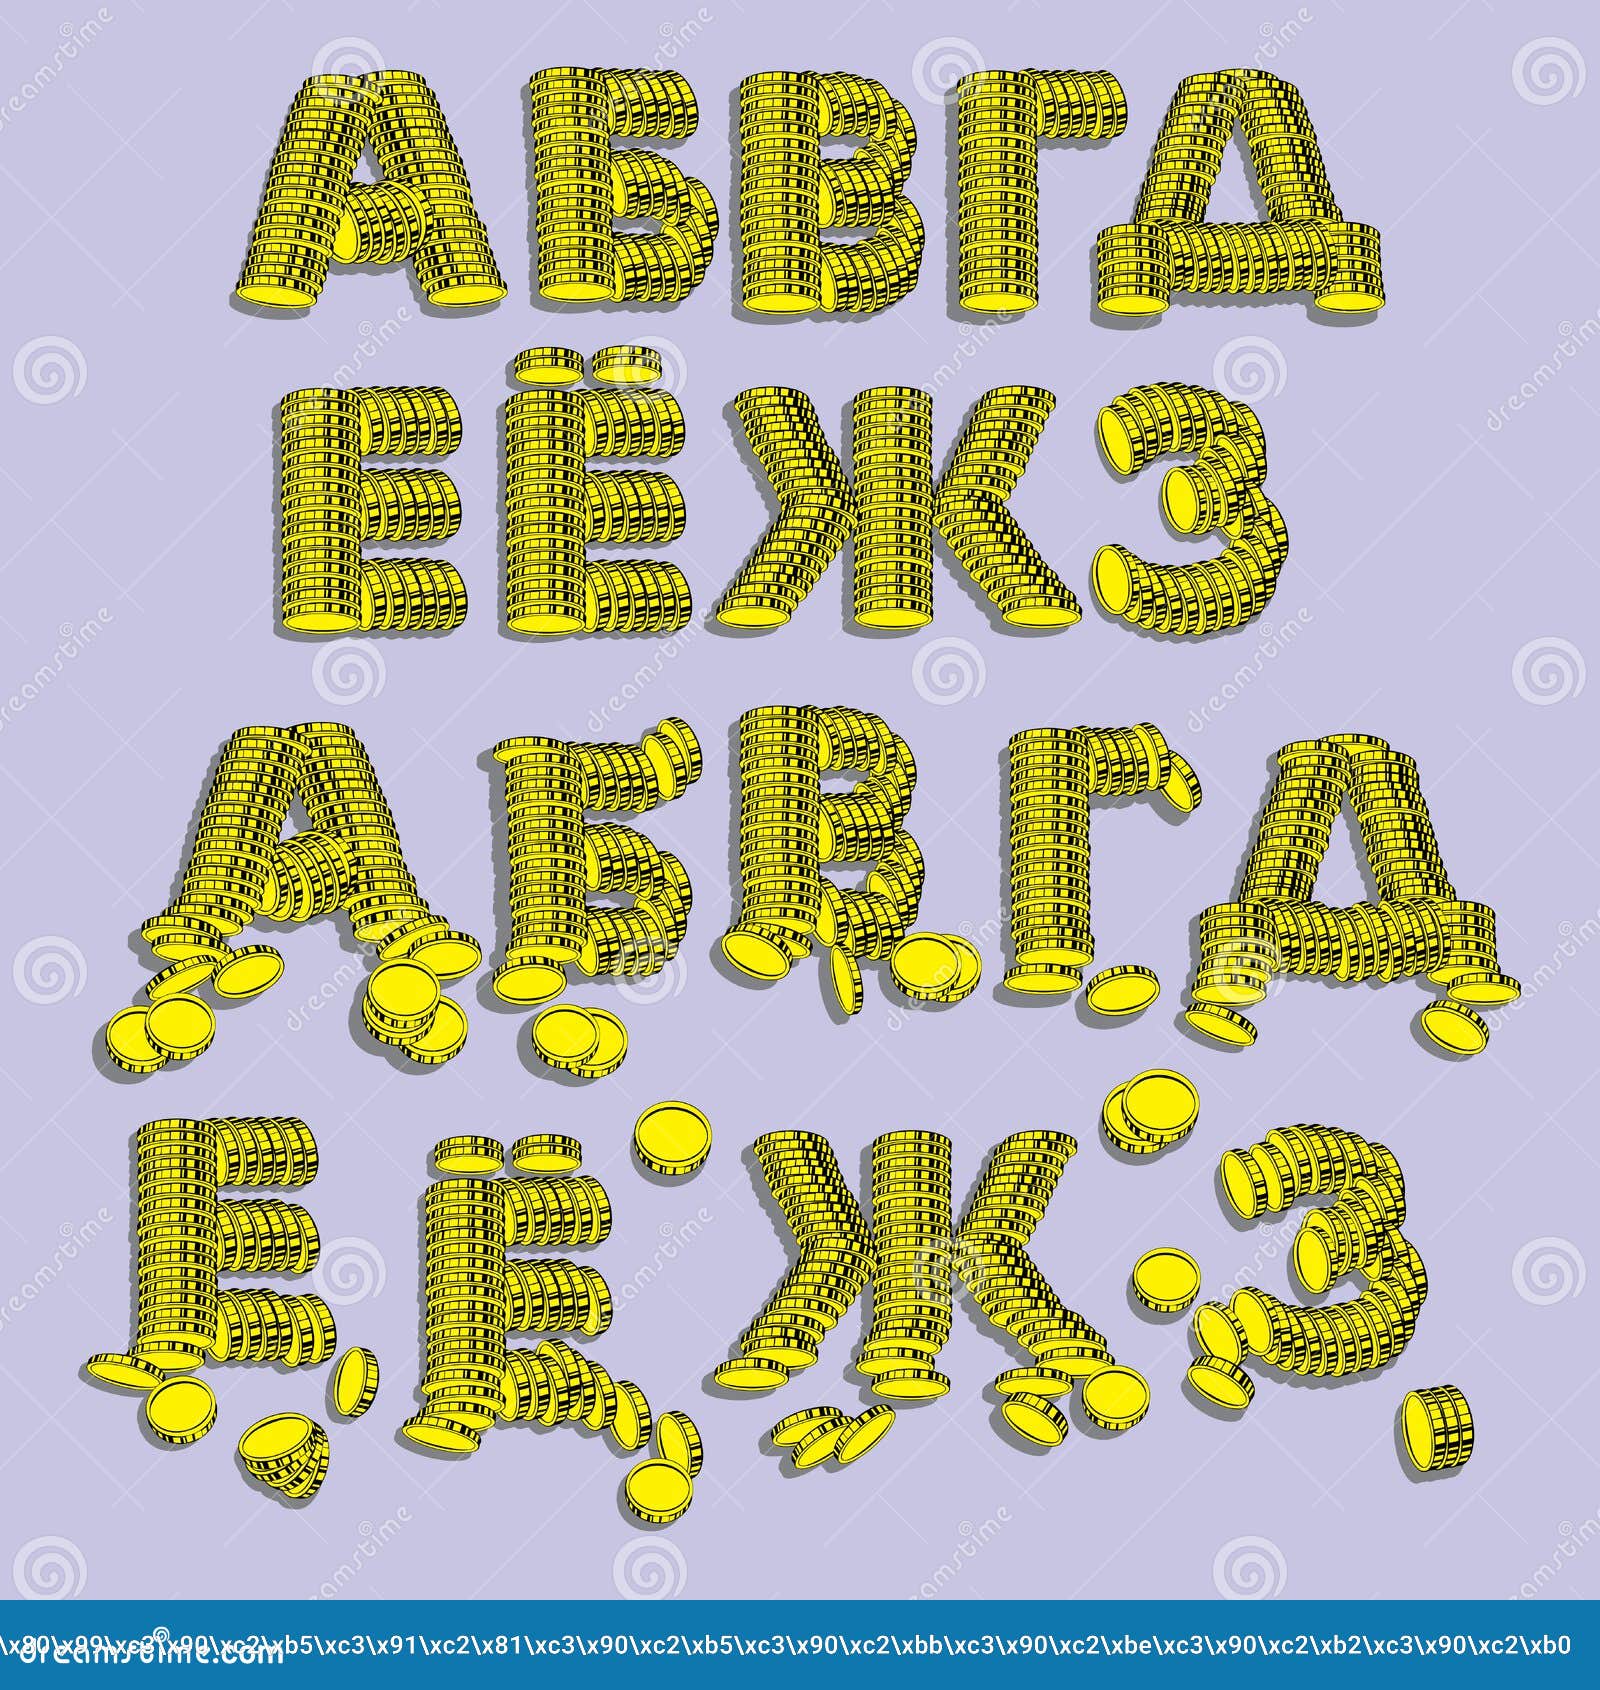 All Russian letters part 1